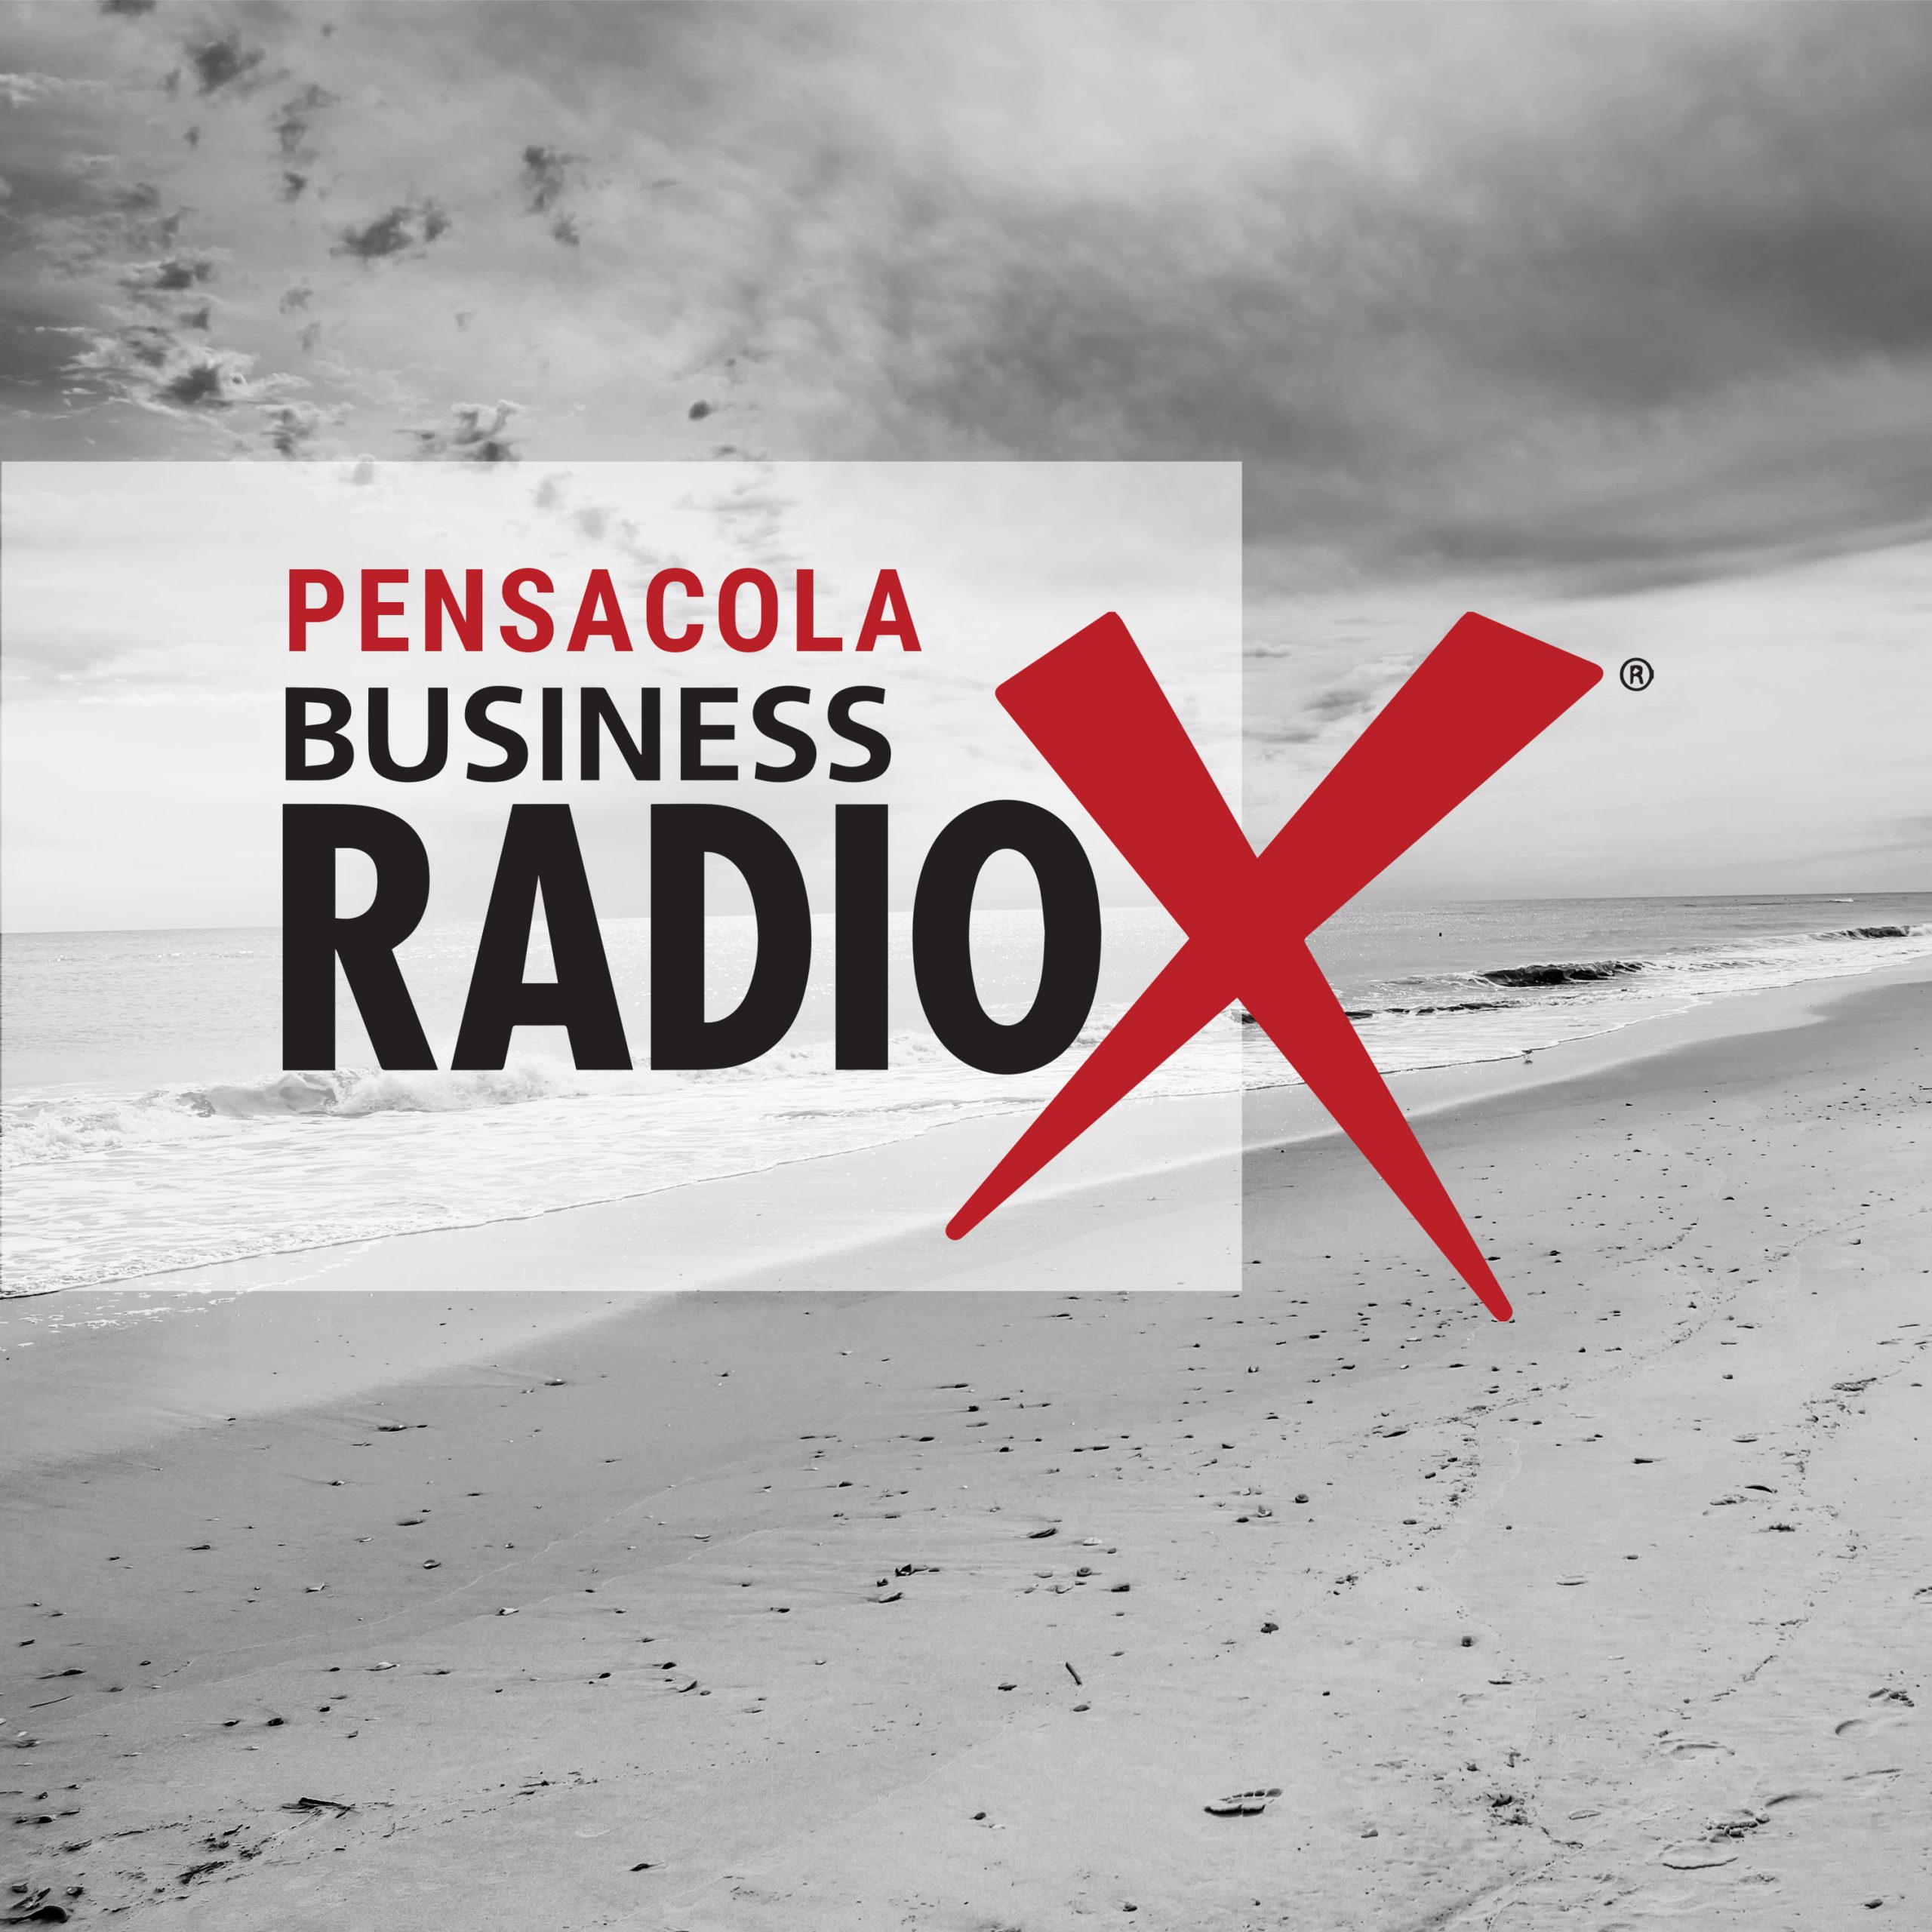 Pensacola Business Radio 10.06.15 – Guests: Patricia Madison w/ Campfire, Kolleen Chesley w/ Powerful Women of the Gulf Coast and Laurie Murphy w/ Coastal Keeper